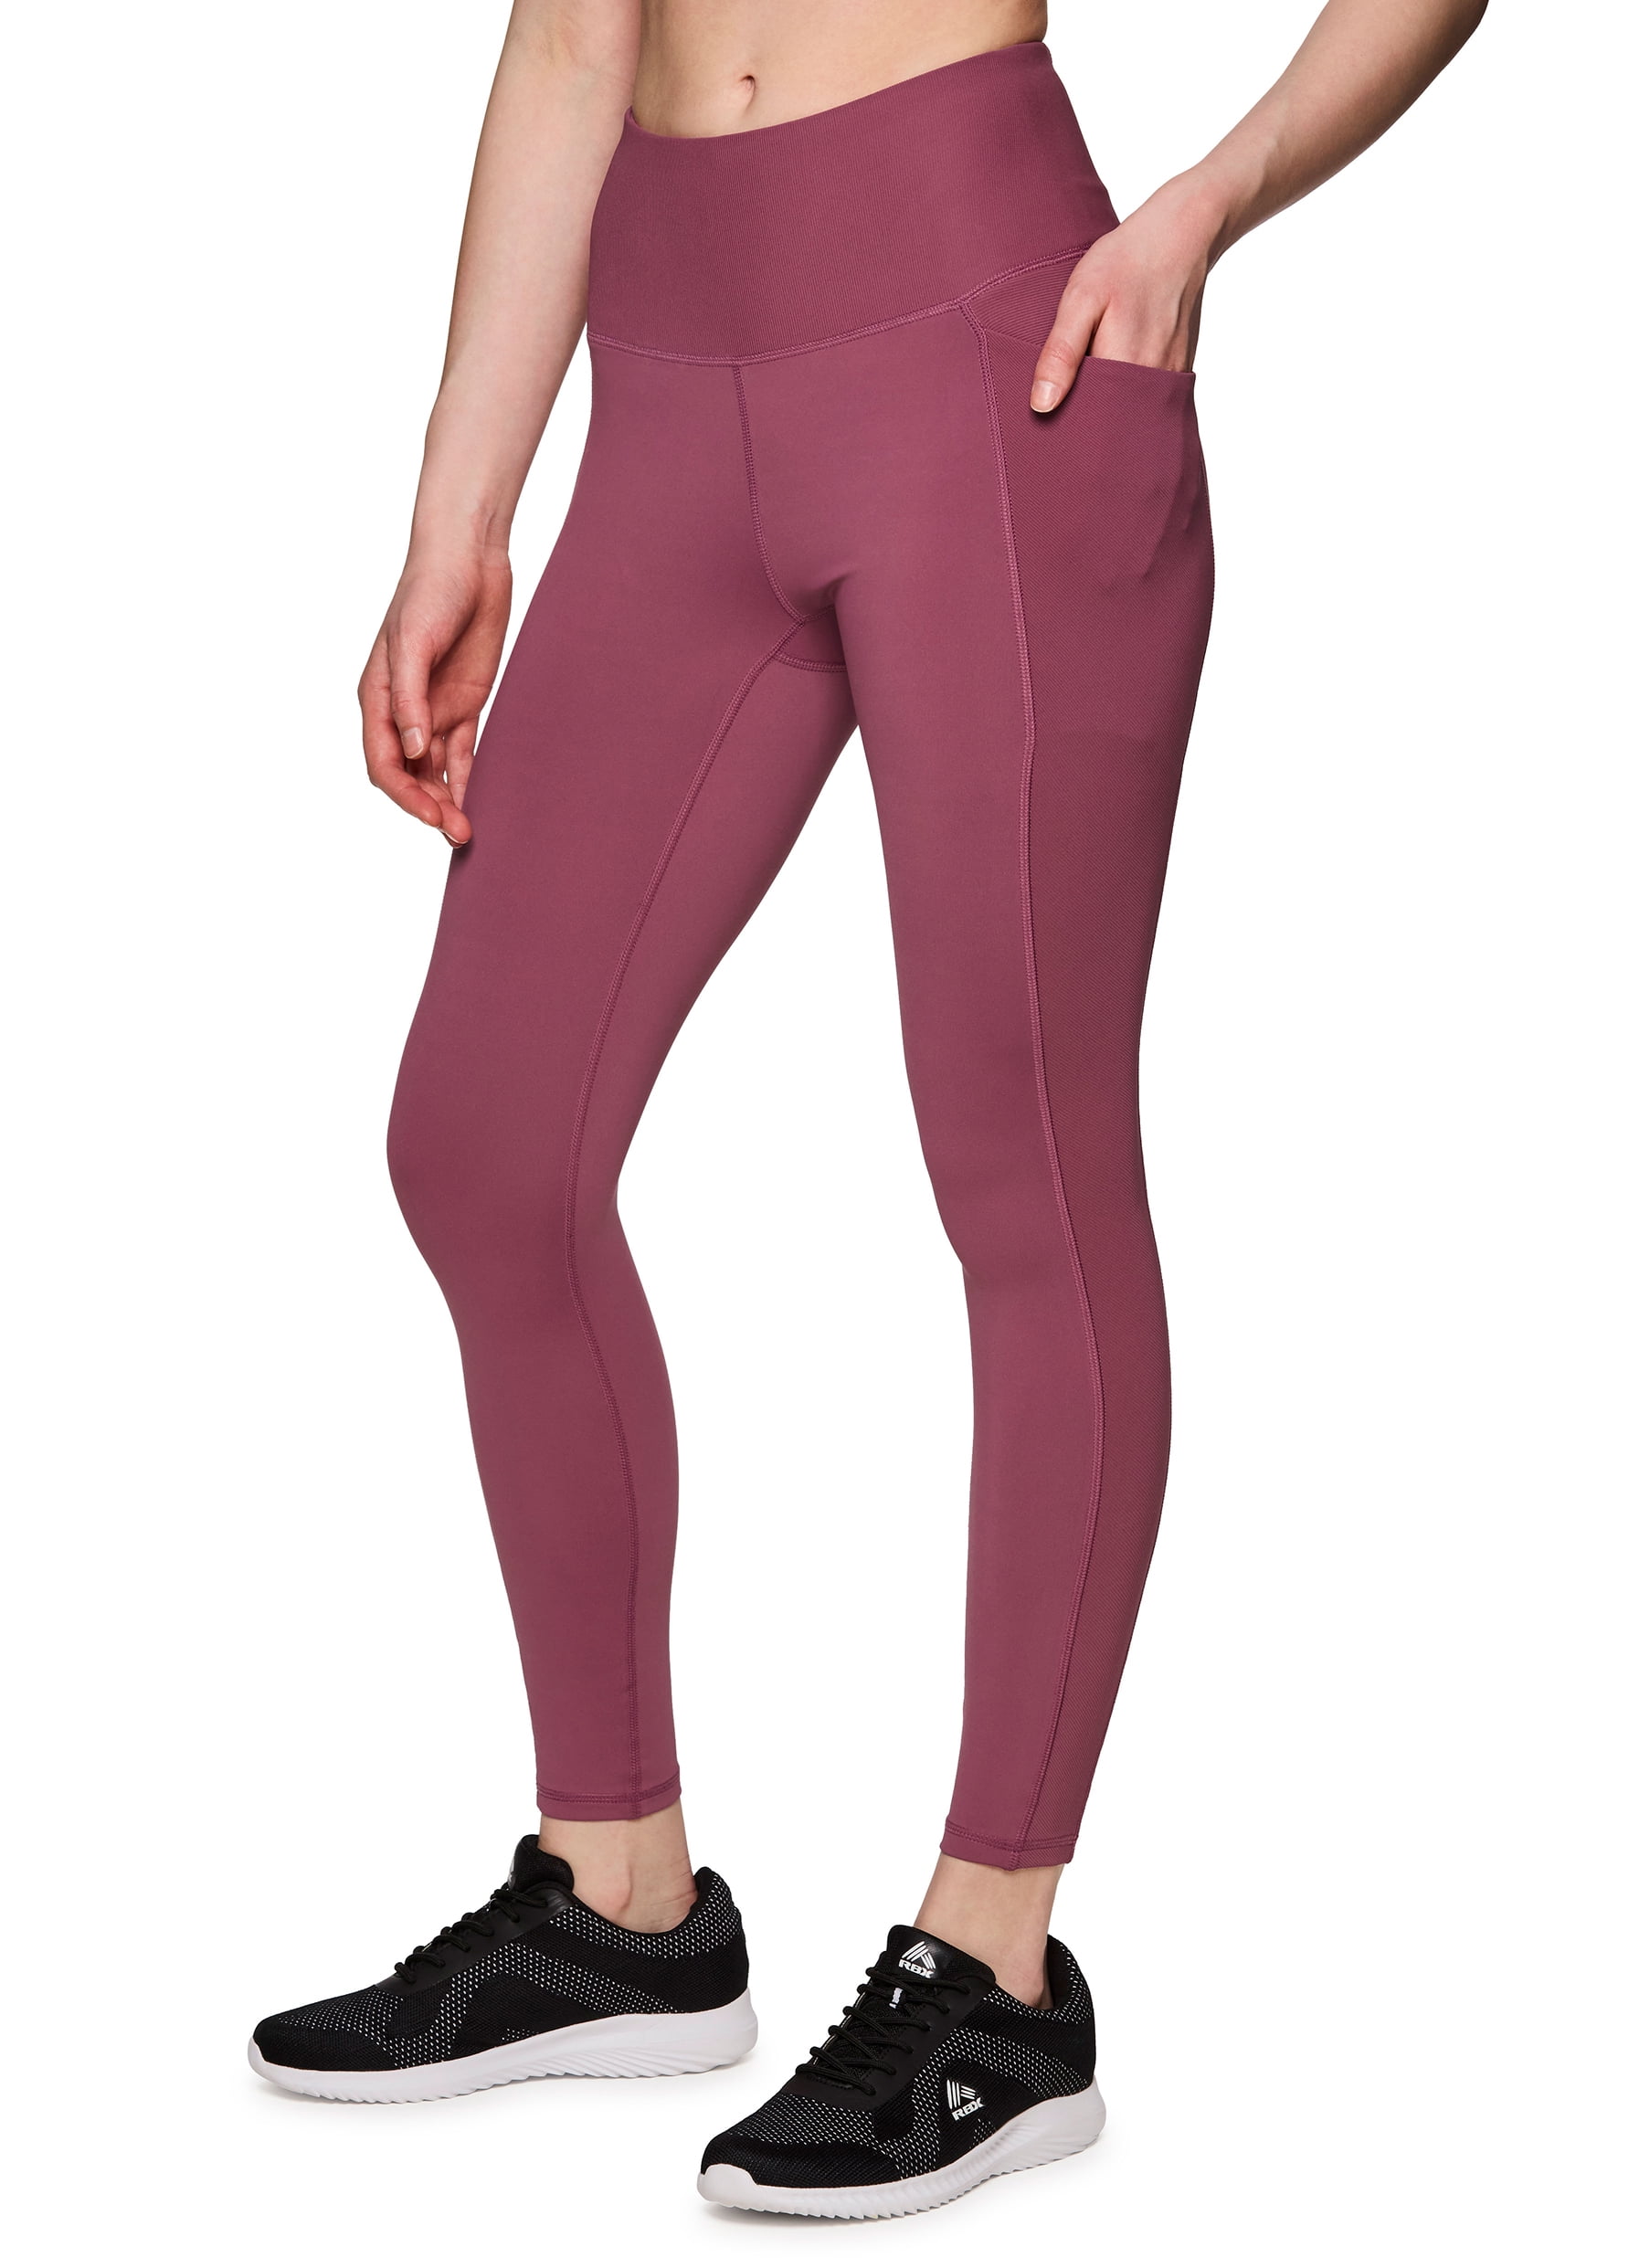 RBX Capri Leggings/Workout/Yoga/Running Pants, Small, Pink and